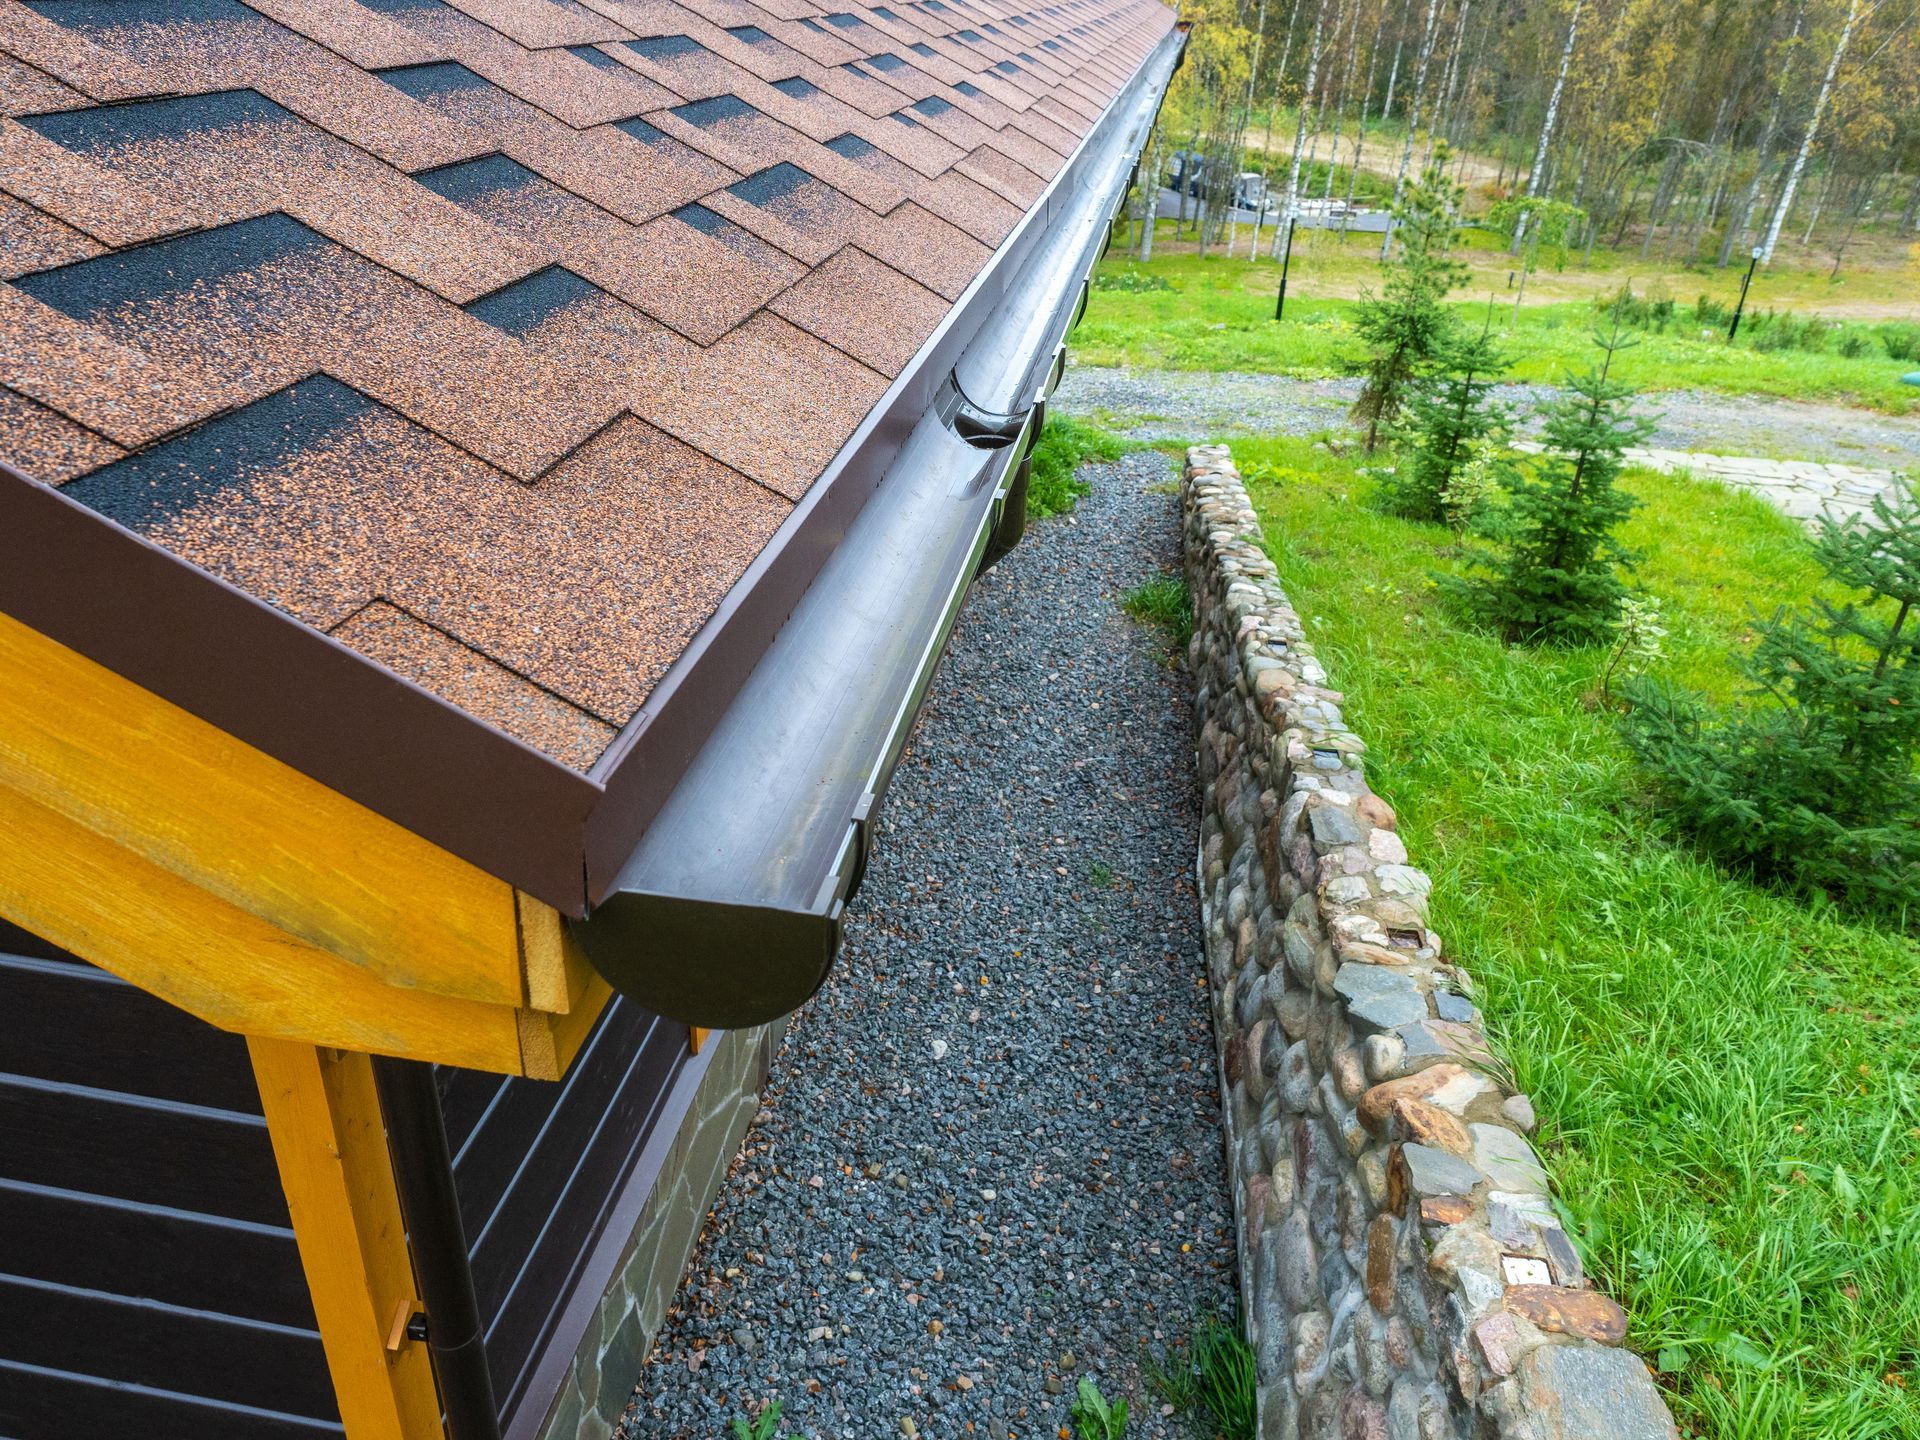 An aluminum gutter mounted beneath a roof, efficiently channeling and diverting water for effective roof drainage.